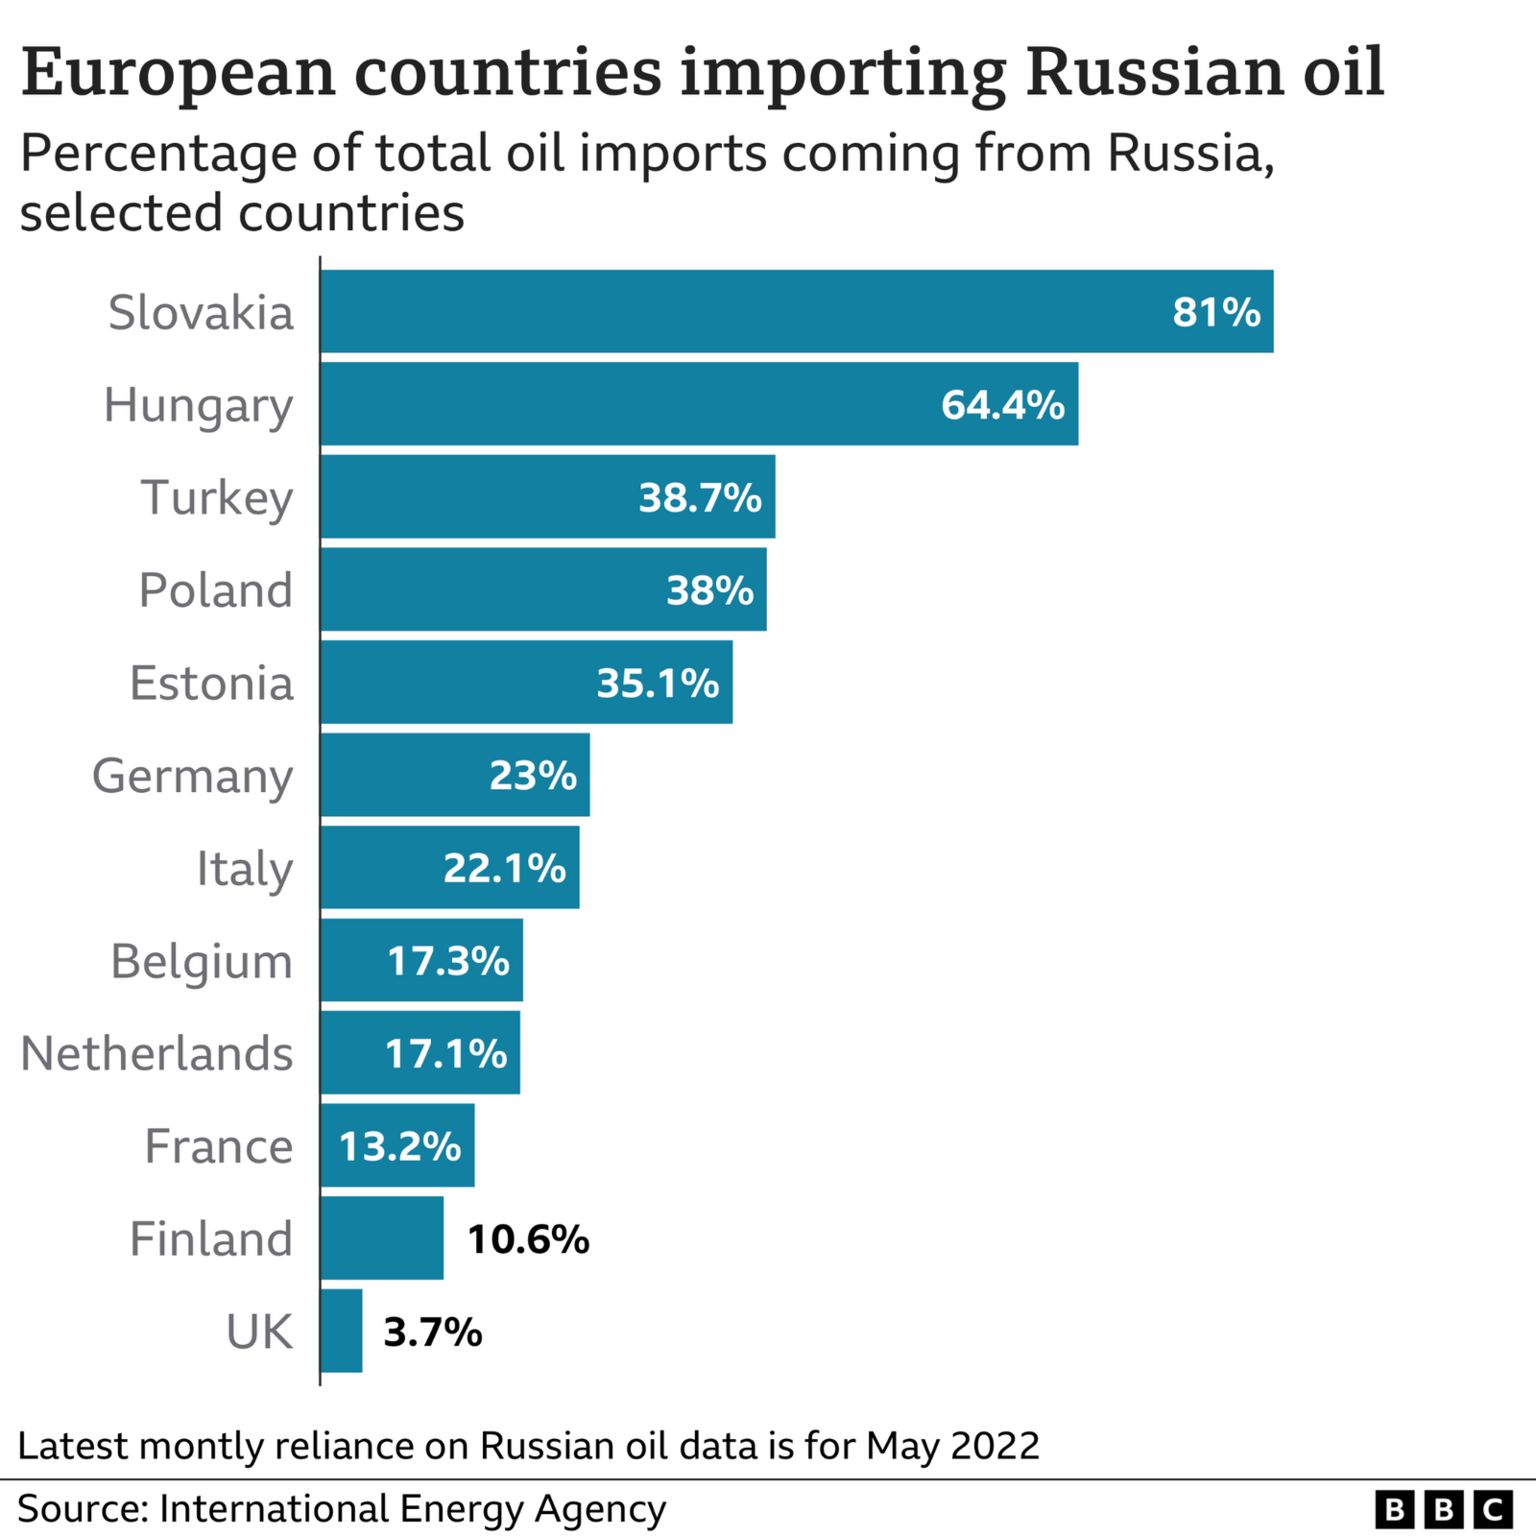 Graphic showing the percentage of total oil imports coming from Russia to selected European countries